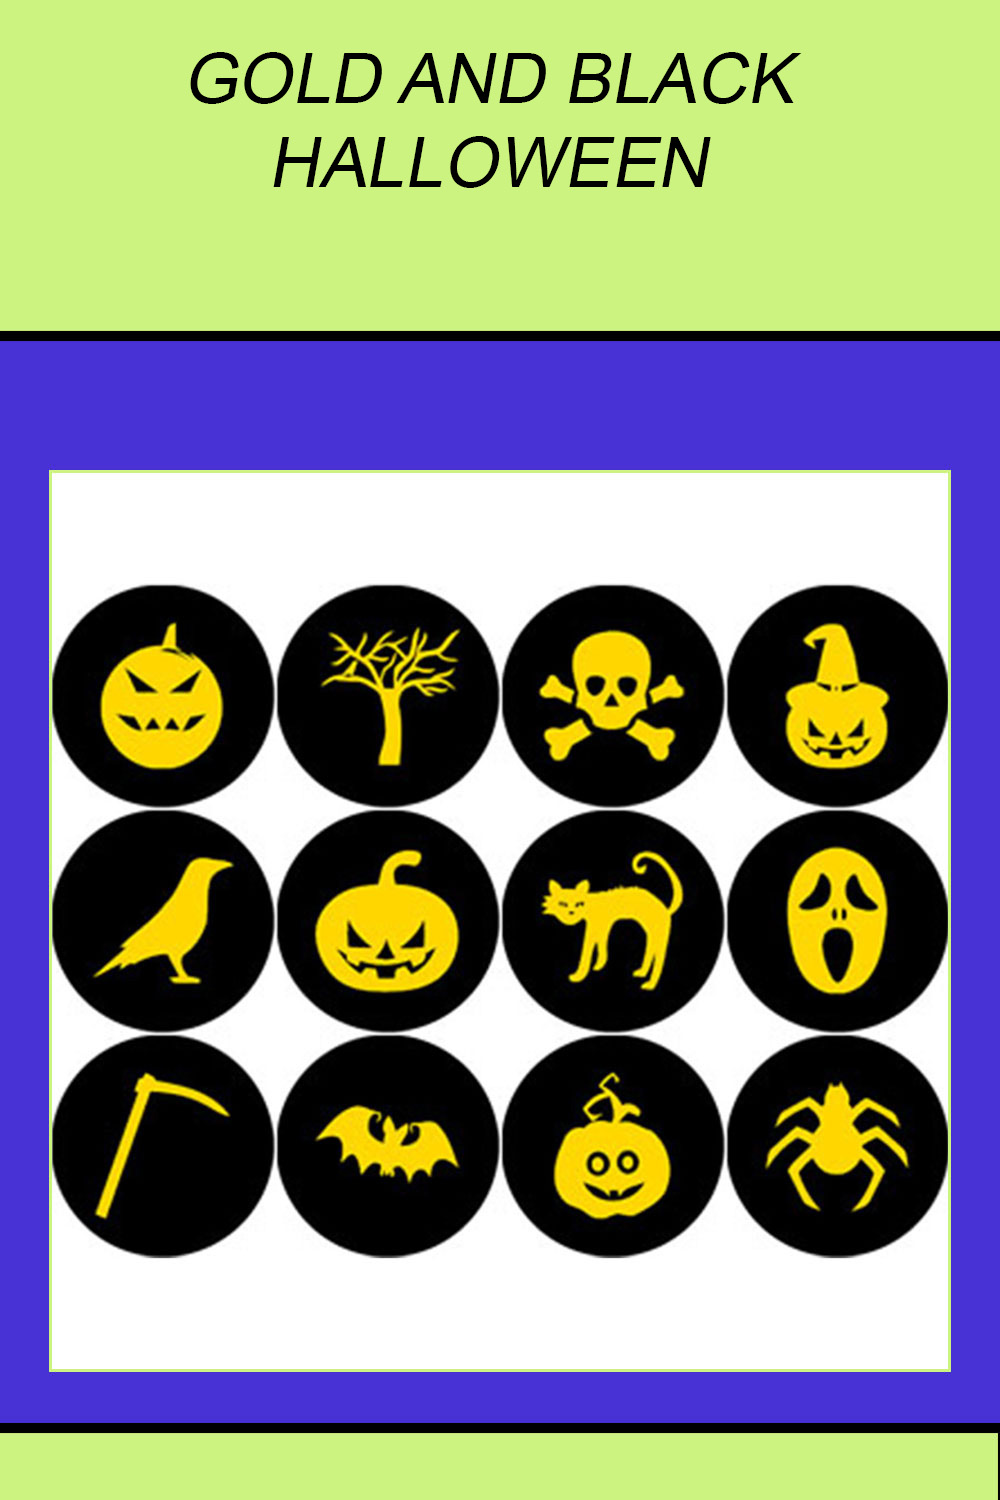 GOLD AND BLACK HALLOWEEN ROUND ICONS pinterest preview image.